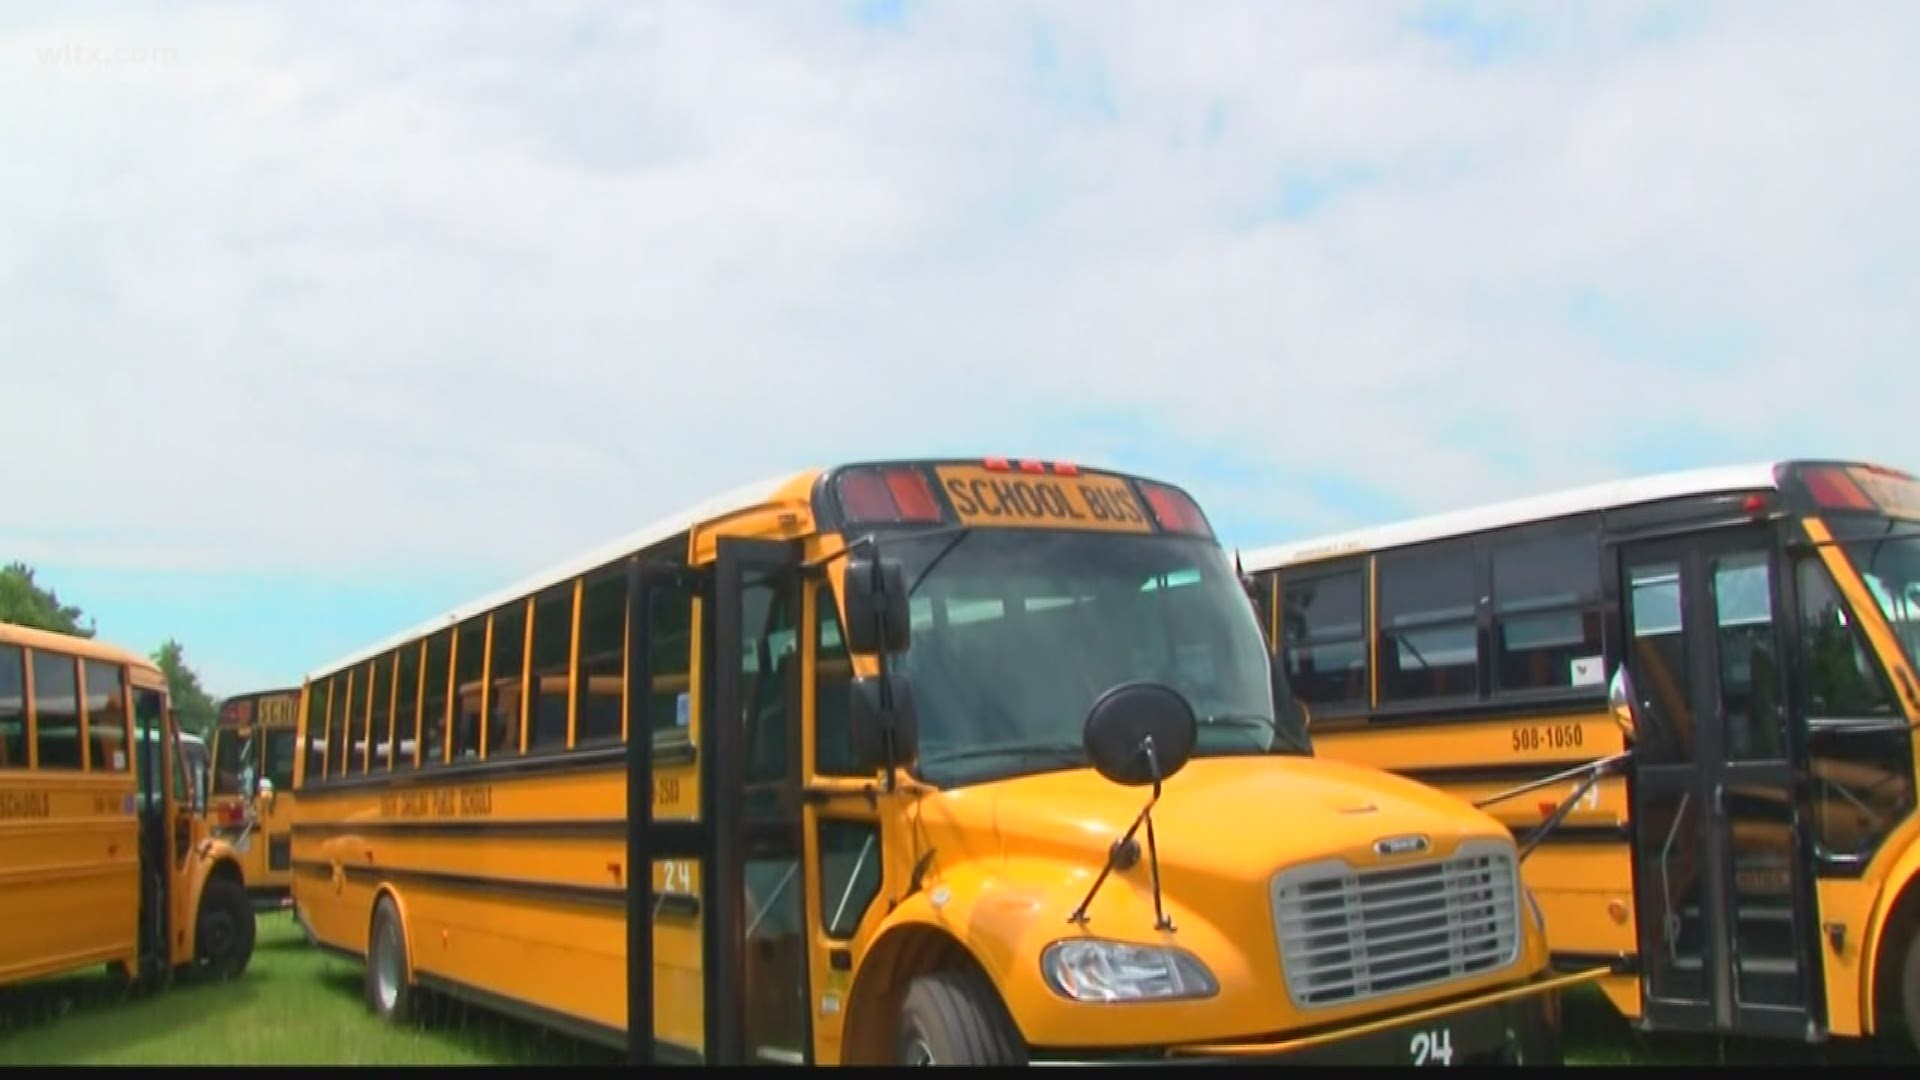 We spoke with district officials to find out how they are addressing drivers' concerns